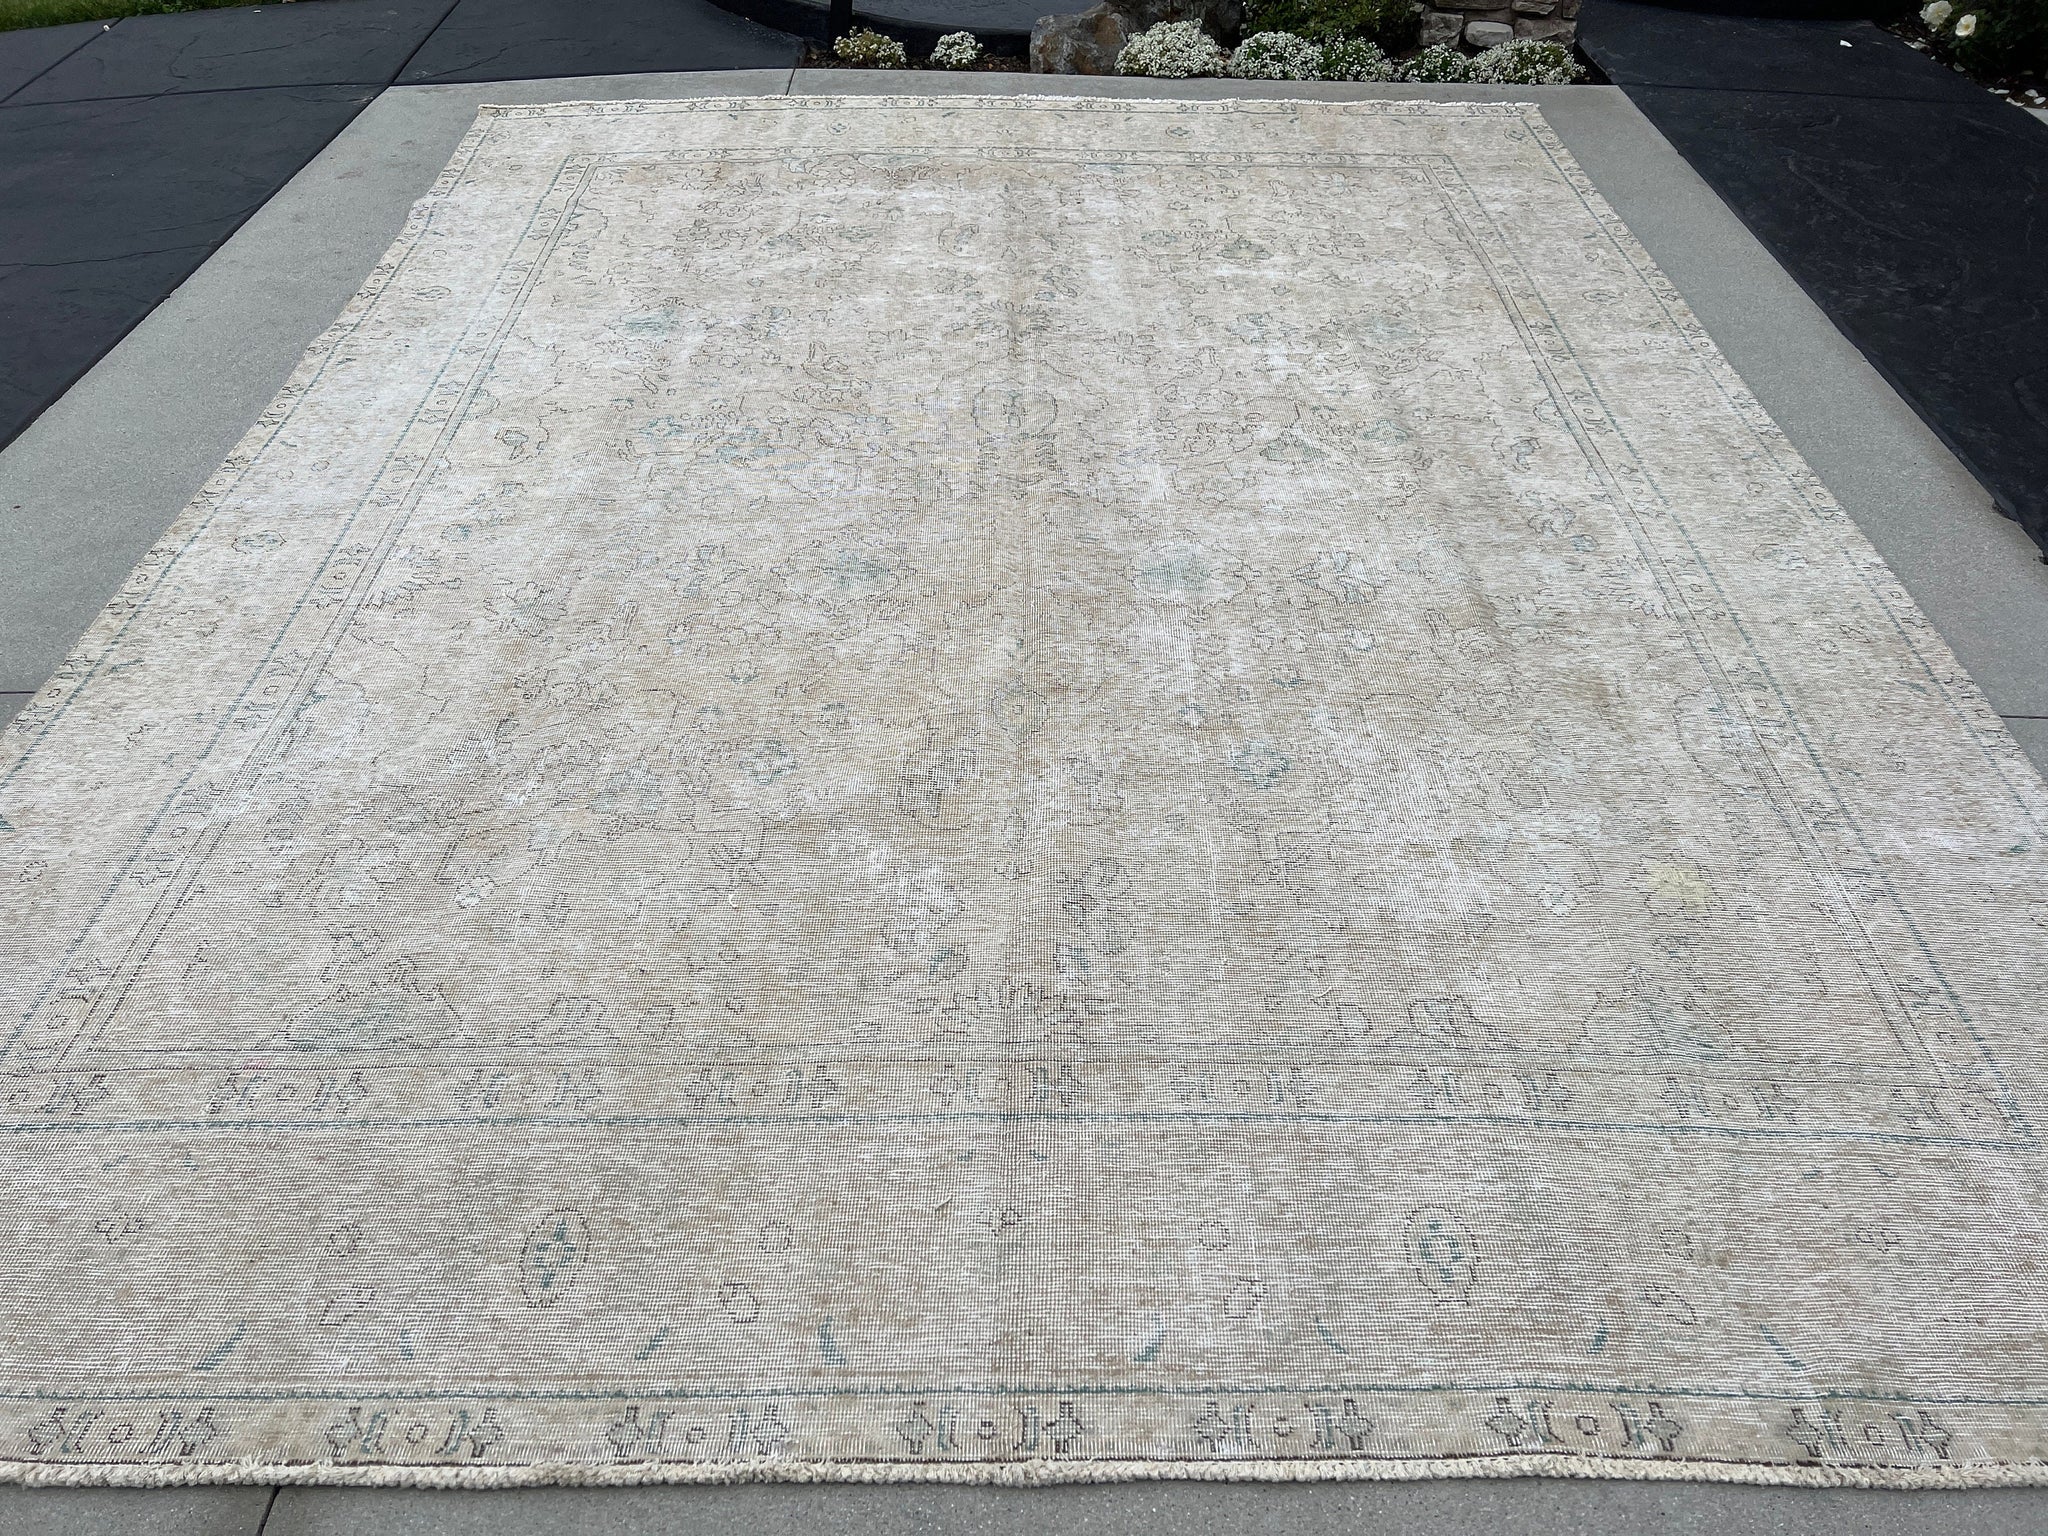 10x13 (305x400) Handmade Afghan Rug | Neutral Muted Grey Gray Cream Beige Teal Turquoise Black | Wool Hand Knotted Turkish Persian Floral